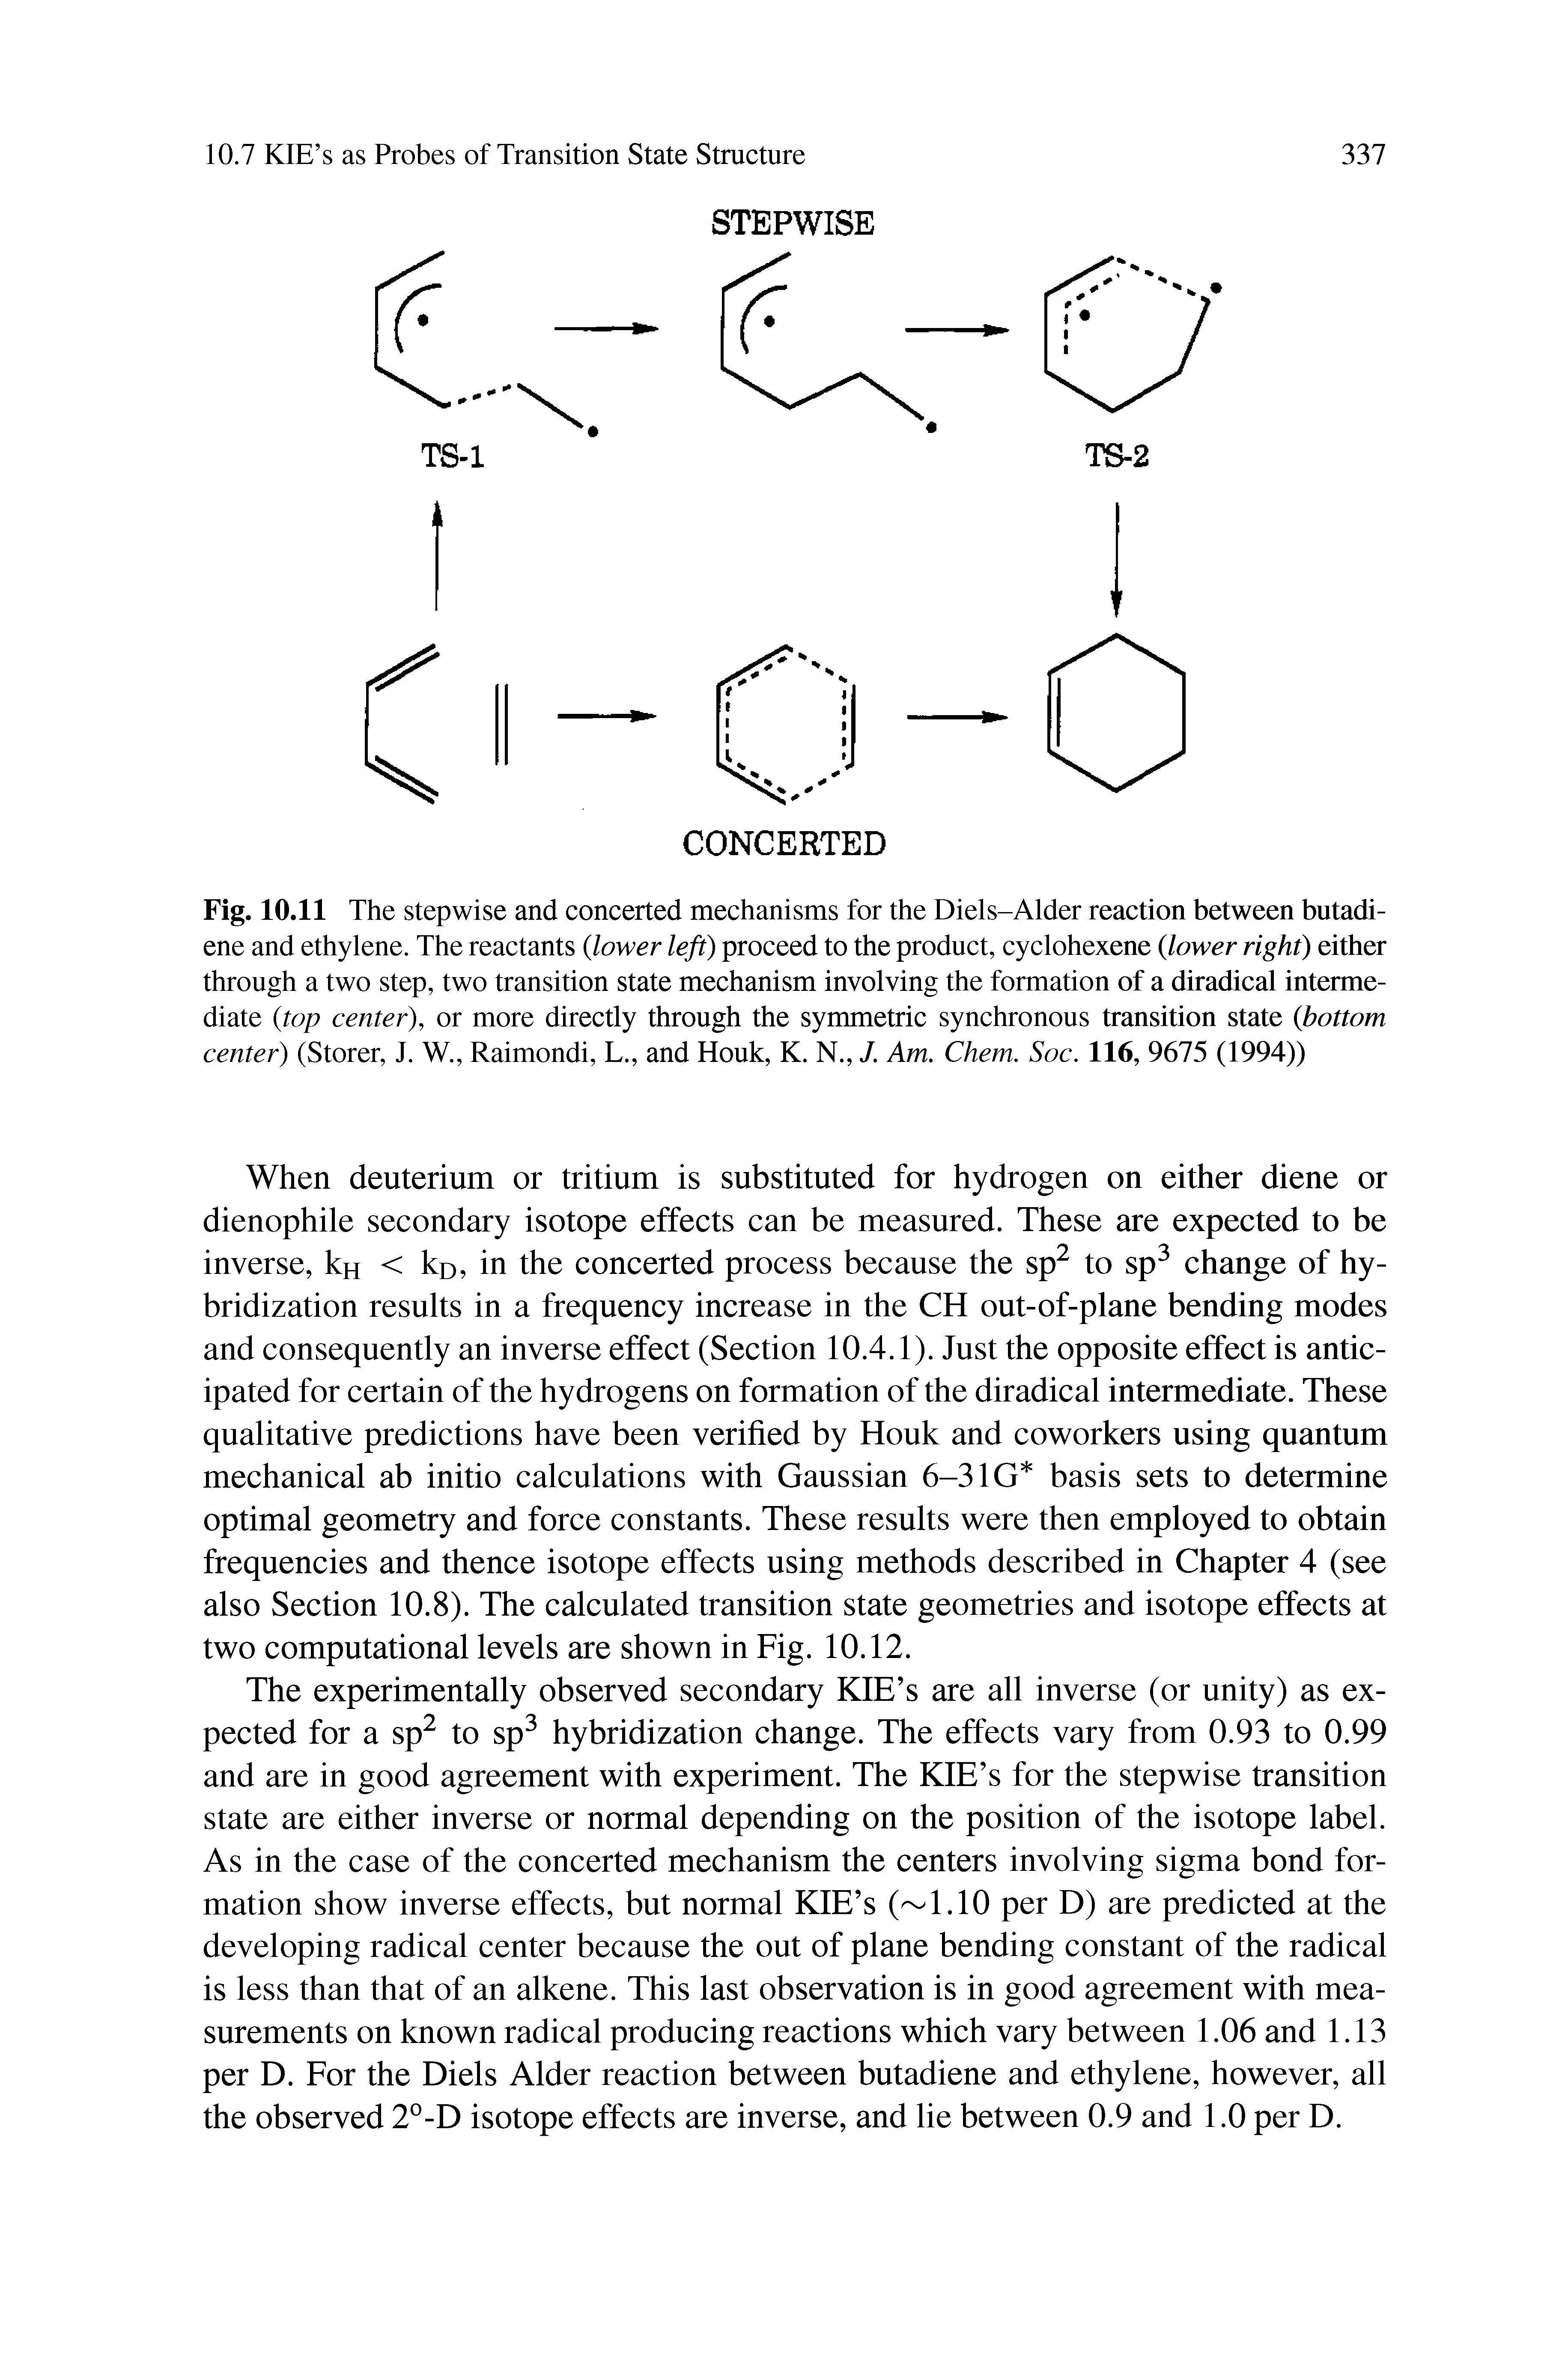 Fig. 10.11 The stepwise and concerted mechanisms for the Diels-Alder reaction between butadiene and ethylene. The reactants (lower left) proceed to the product, cyclohexene (lower right) either through a two step, two transition state mechanism involving the formation of a diradical intermediate (top center), or more directly through the symmetric synchronous transition state (bottom center) (Storer, J. W., Raimondi, L., and Houk, K. N., J. Am. Chem. Soc. 116, 9675 (1994))...